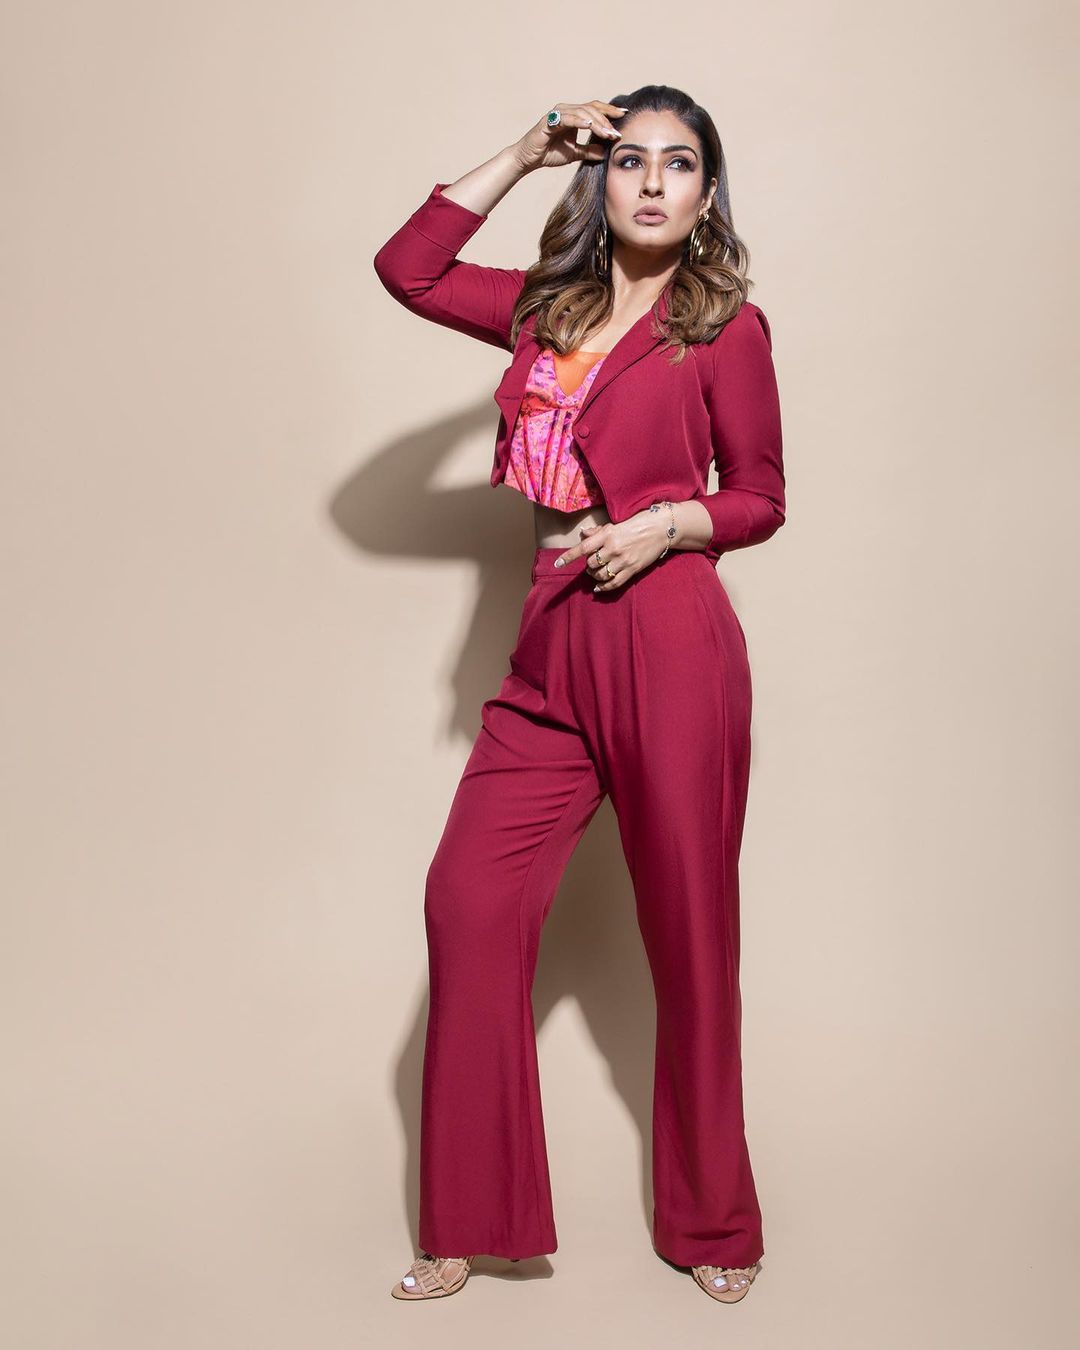 Raveena Tandon strikes a pose in the maroon suit